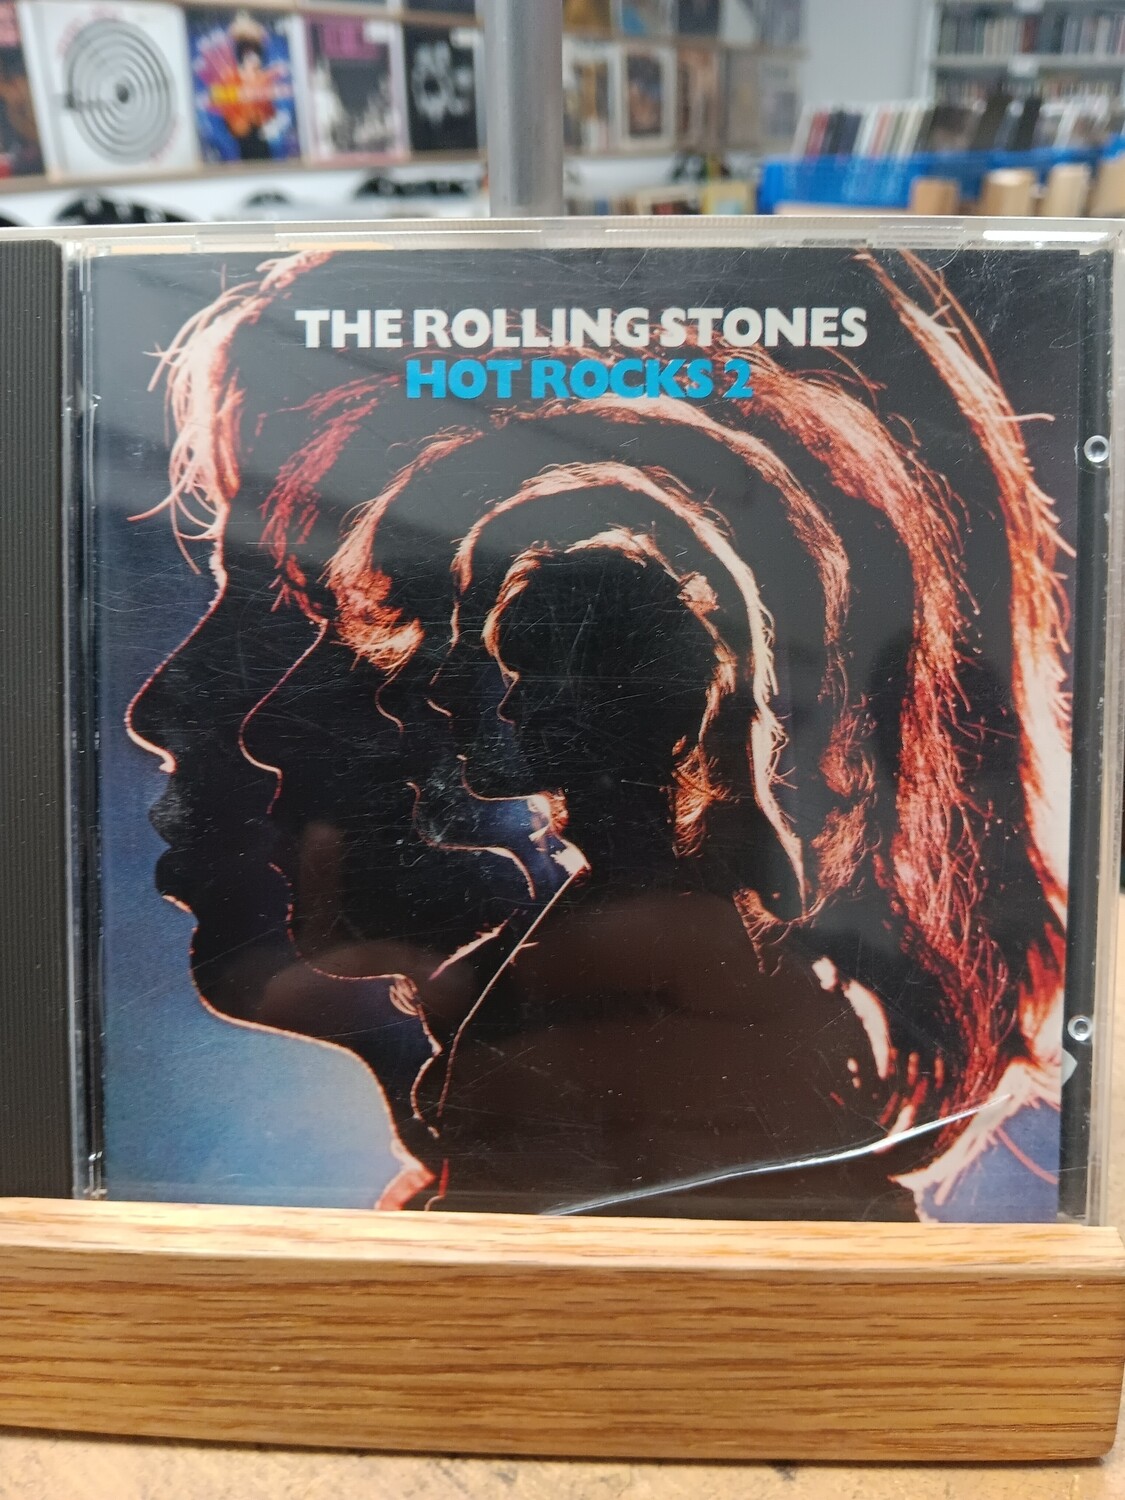 THE ROLLING STONES - Hot Rocks 2 (CD)